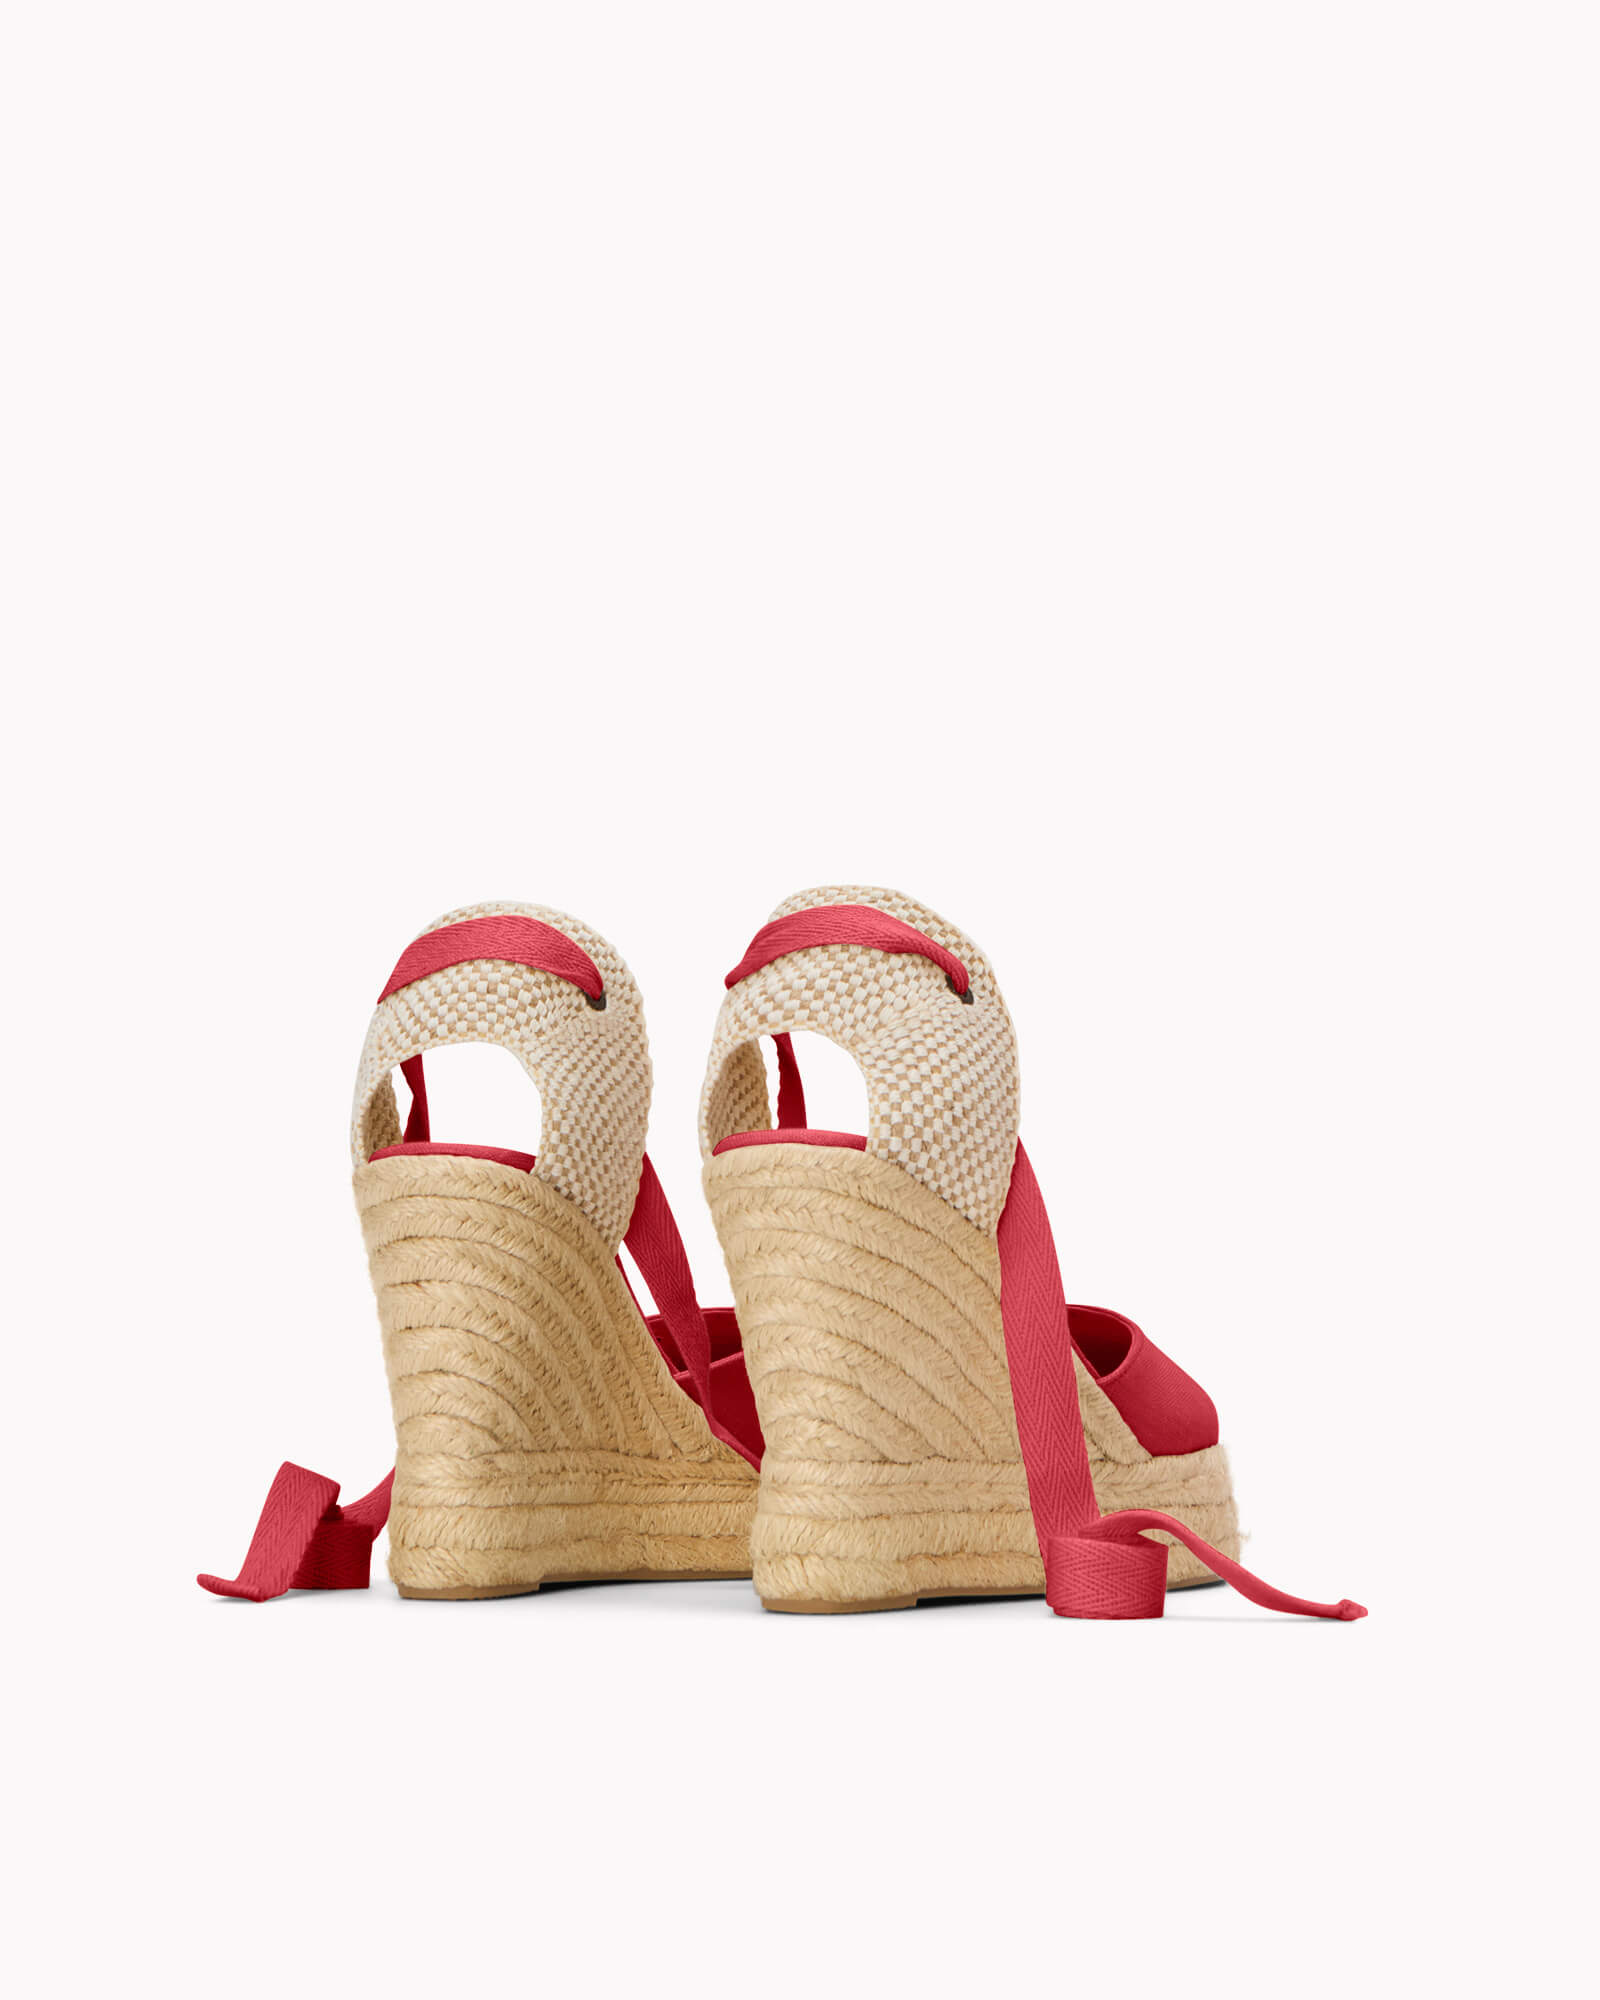 The Platform Wedge - Classic - Reef Red